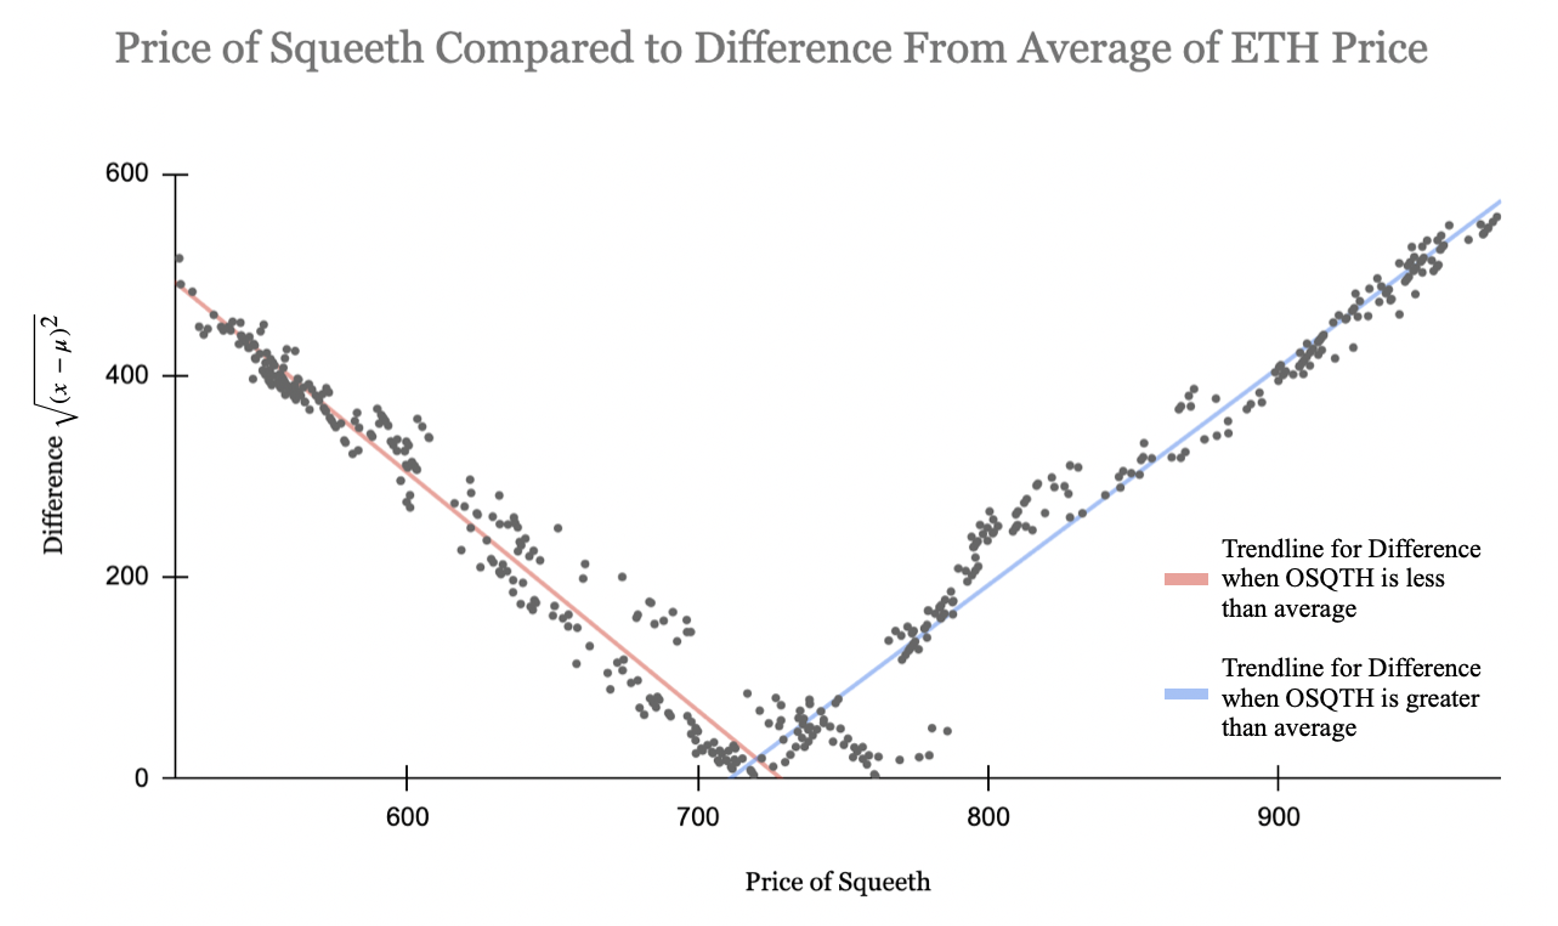 Fig. 3: Chart displaying the price of Squeeth compared to the absolute difference from mean of ETH prices